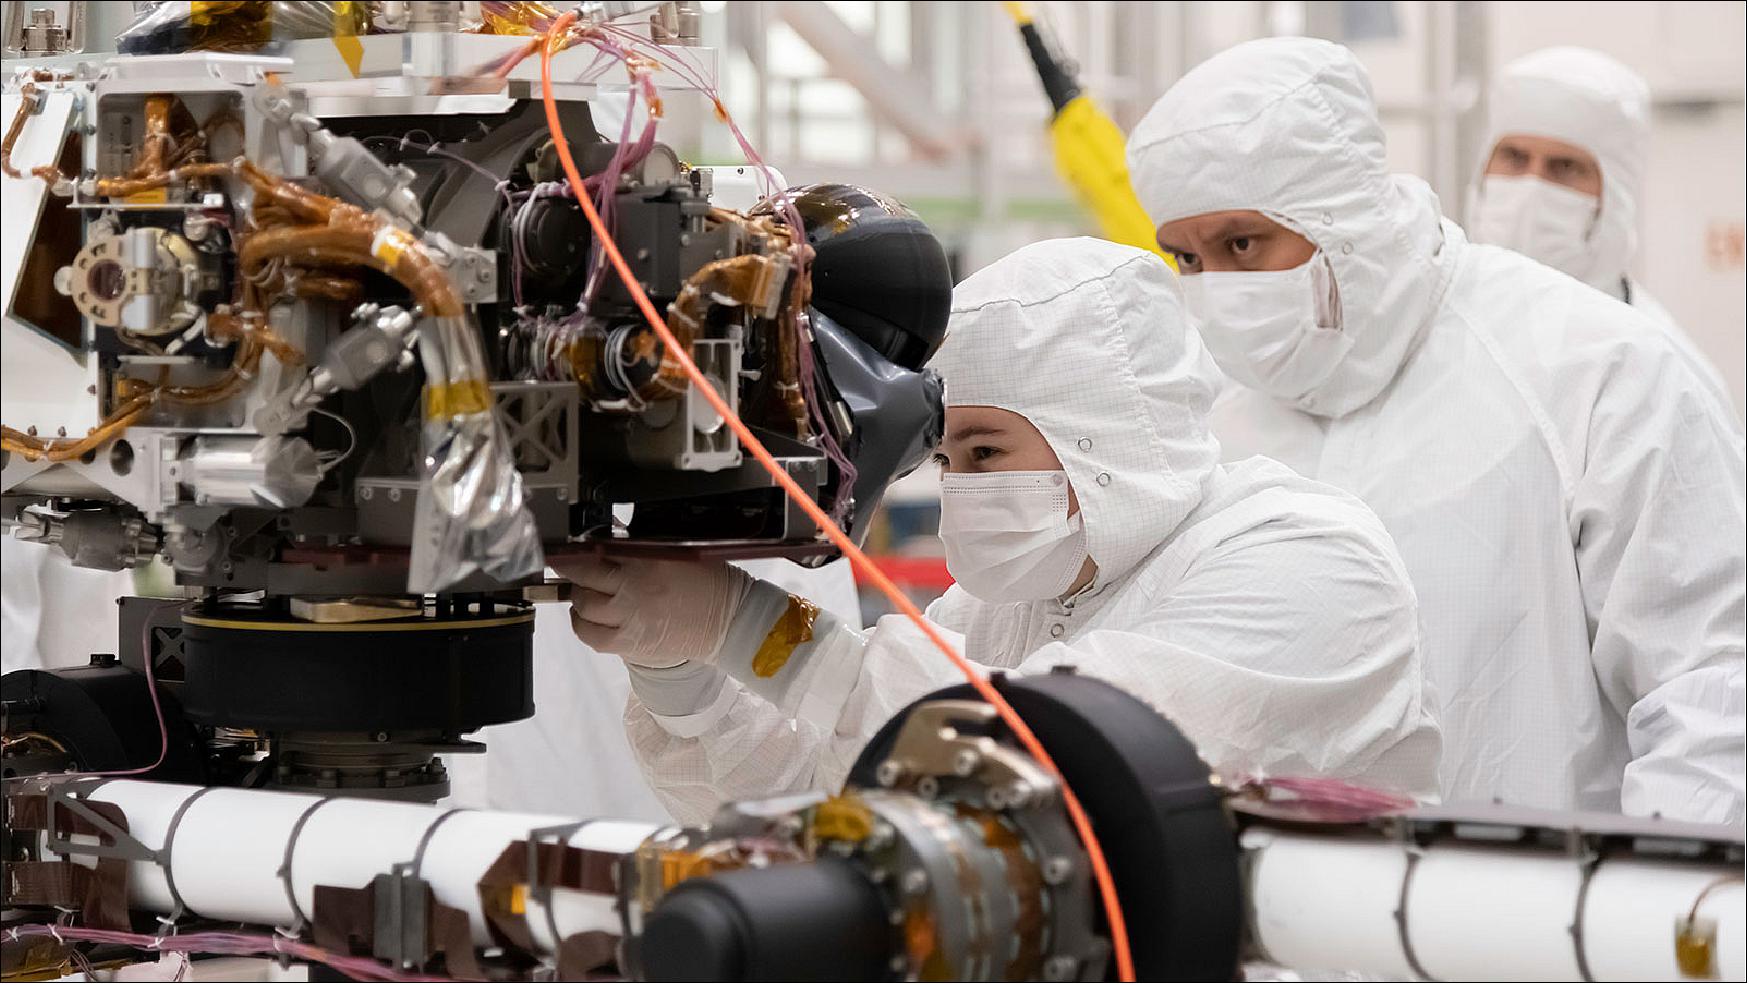 Figure 4: Engineers at JPL install a sensor-filled turret on the end of the rover's 2.1 m long robotic arm. The image was taken on July 11, 2019. The rover's turret includes HD cameras, SHERLOC (Scanning Habitable Environments with Raman & Luminescence for Organics & Chemicals) science instrument, PIXL (Planetary Instrument for X-ray Lithochemistry), and a percussive drill and coring mechanism (image credit: NASA/JPL-Caltech)